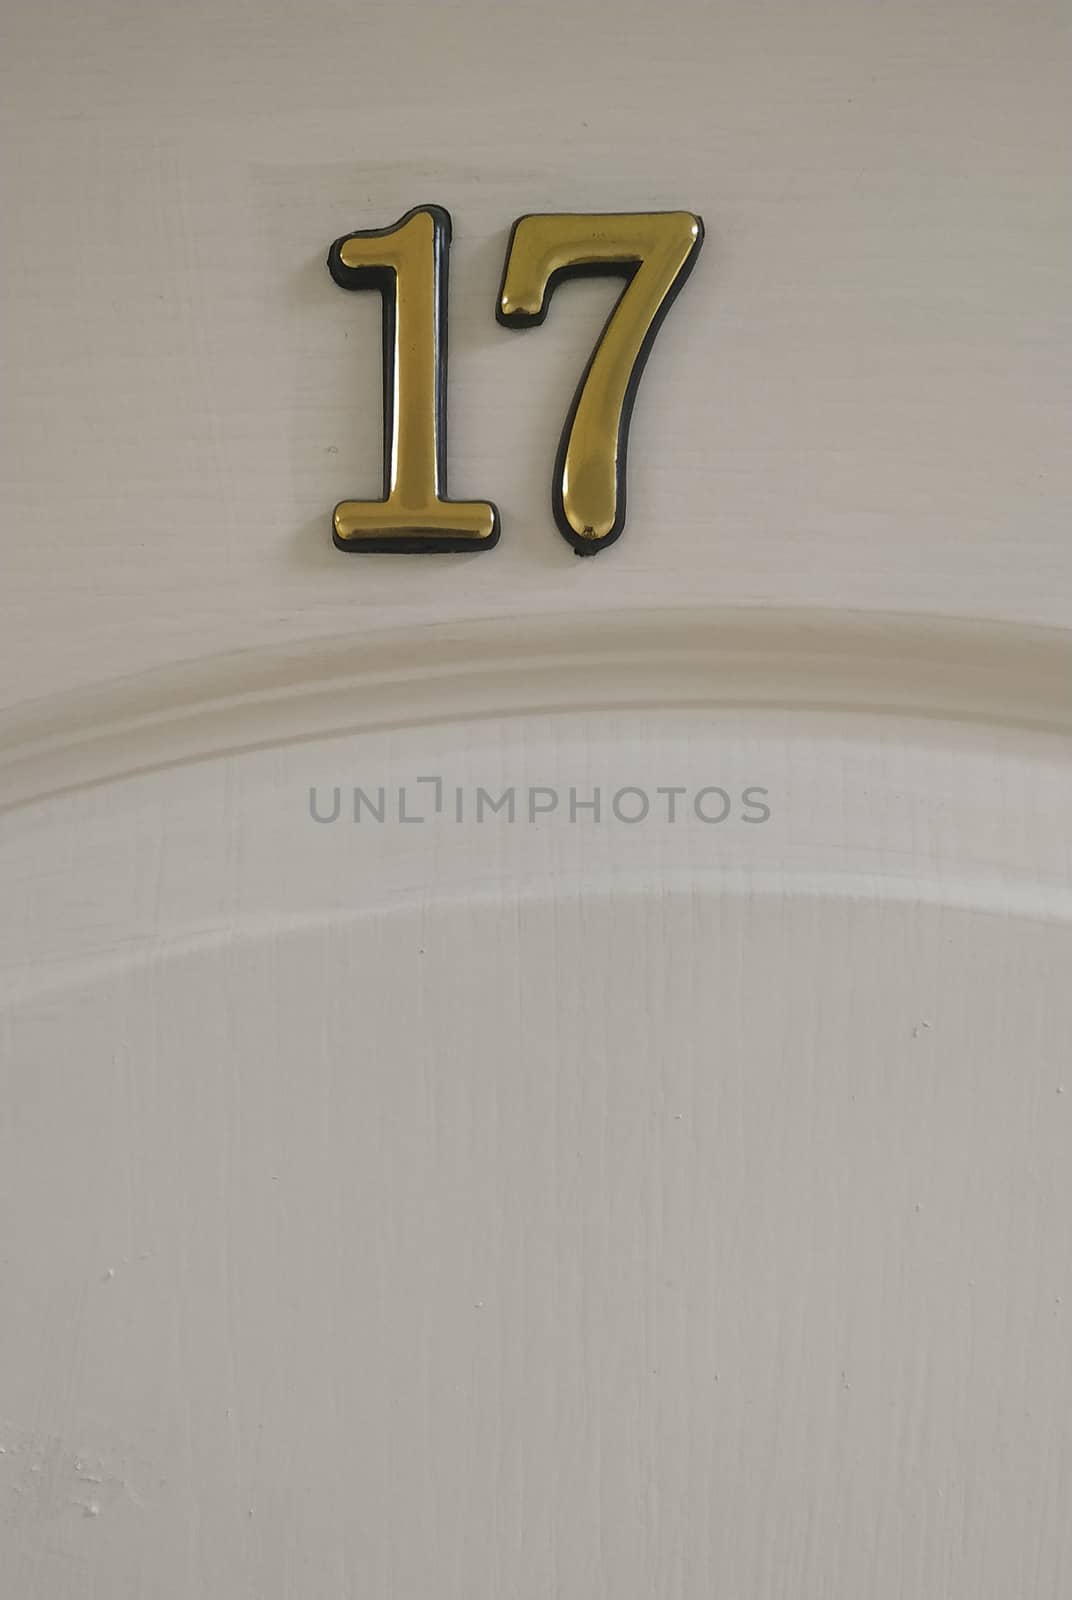 Fragment of a white door with a volume number of 17. Background.